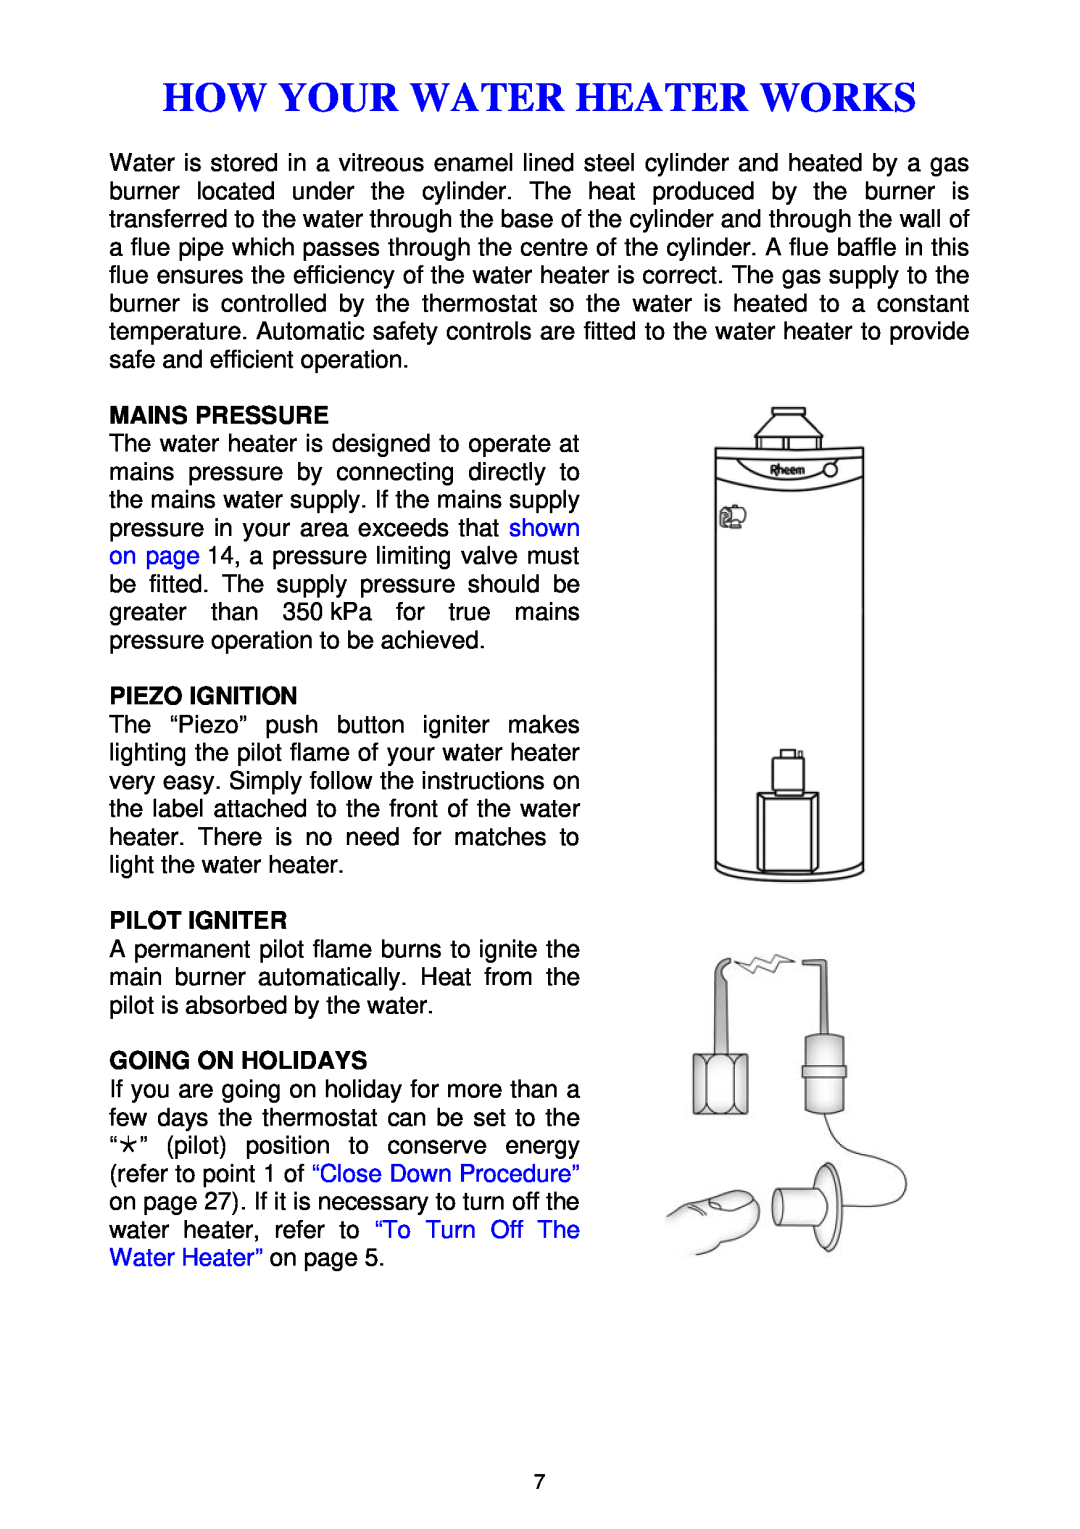 Rheem 300 series How Your Water Heater Works, Mains Pressure, Piezo Ignition, Pilot Igniter, Going On Holidays 